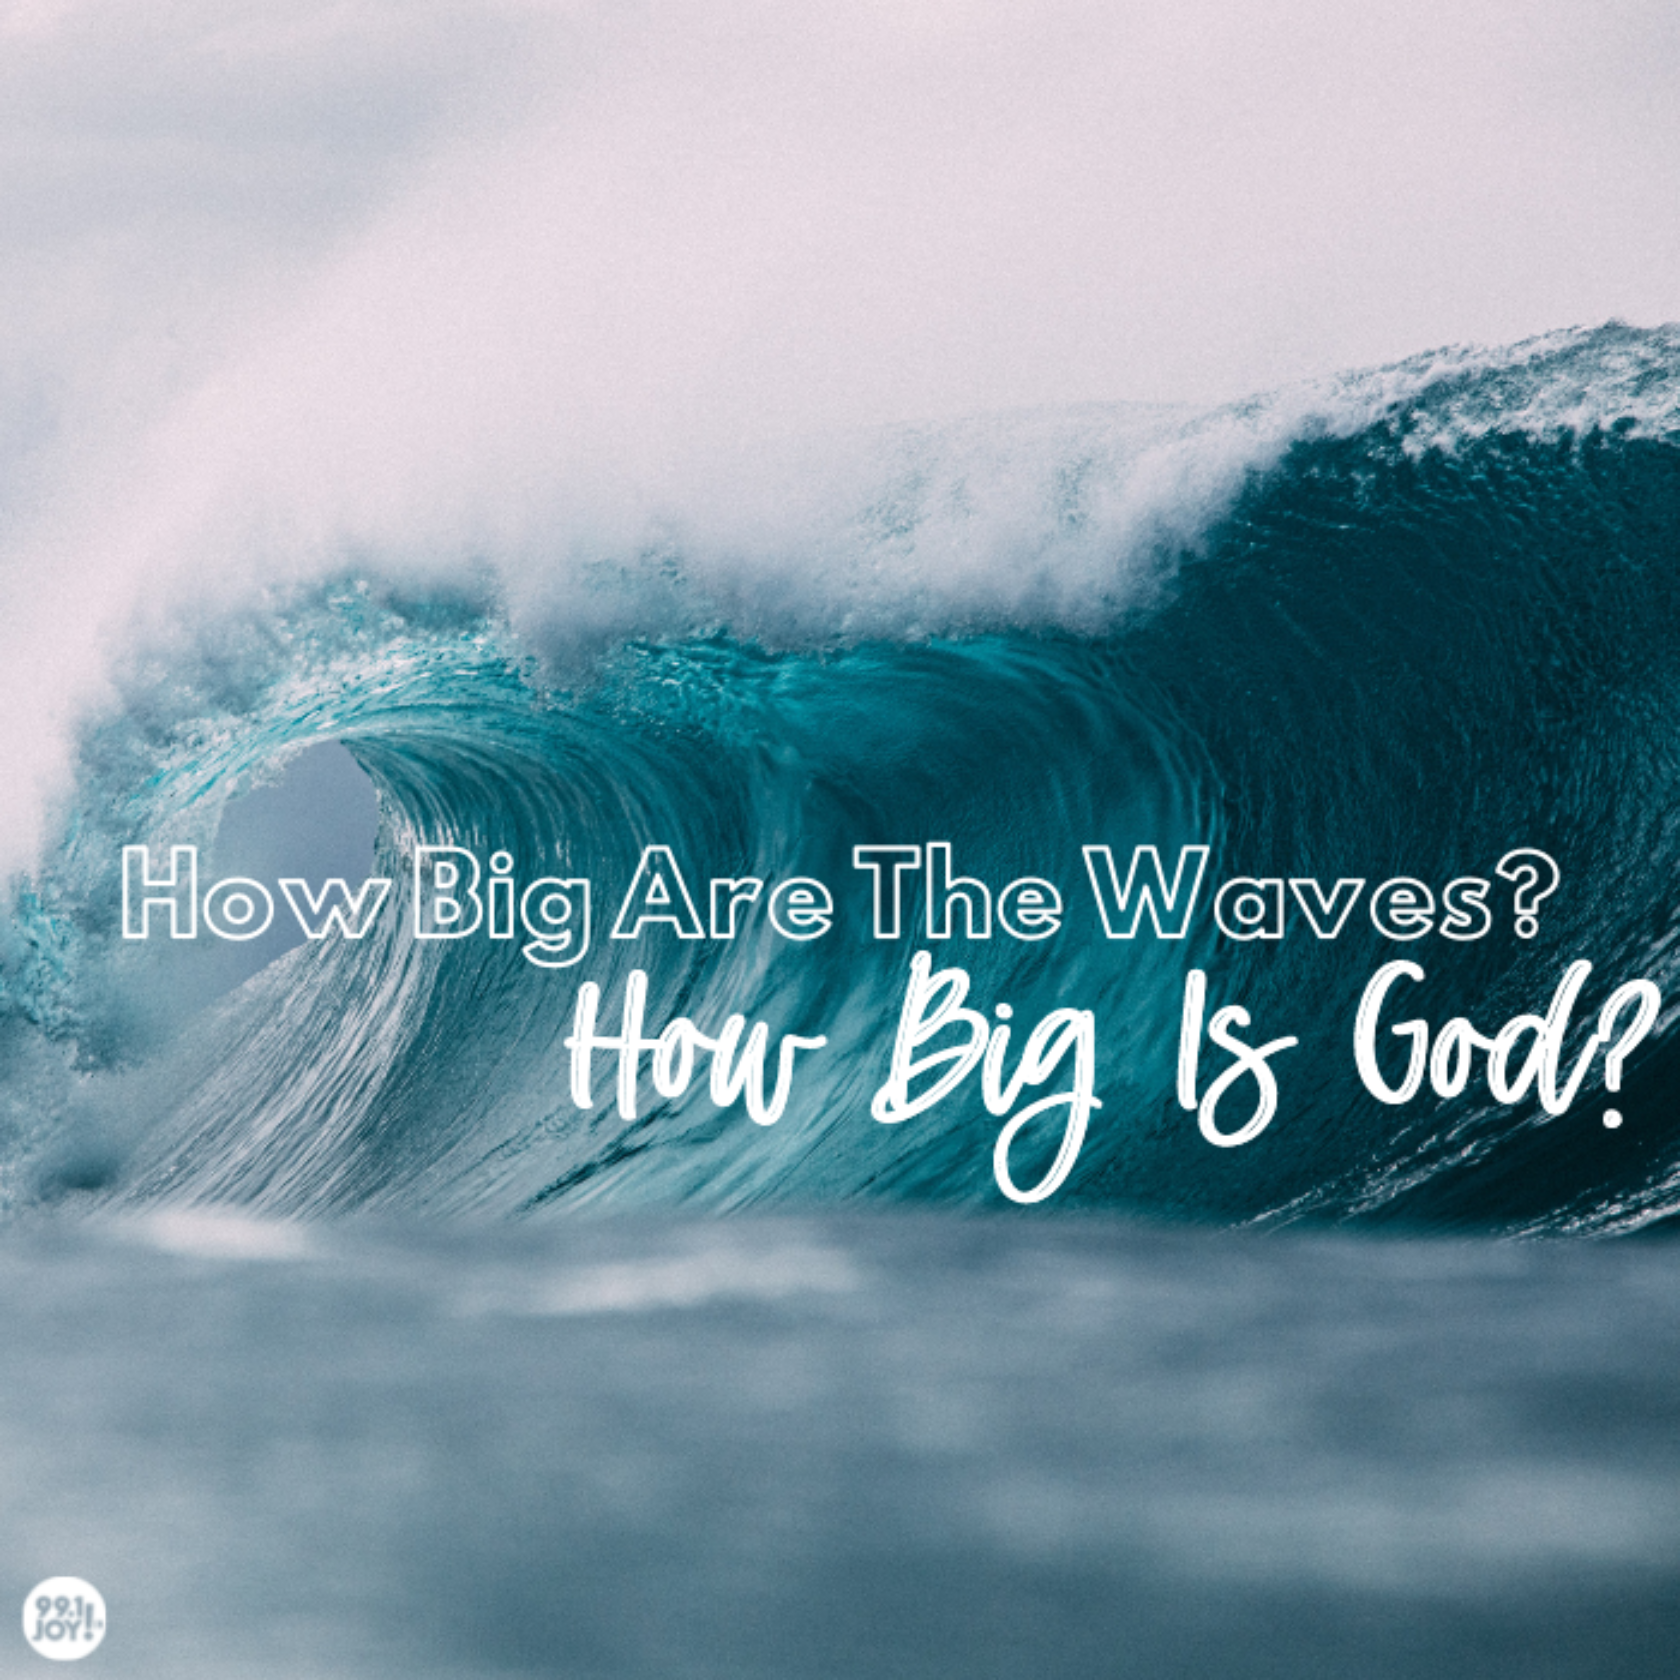 How Big Are The Waves? How Big Is God?